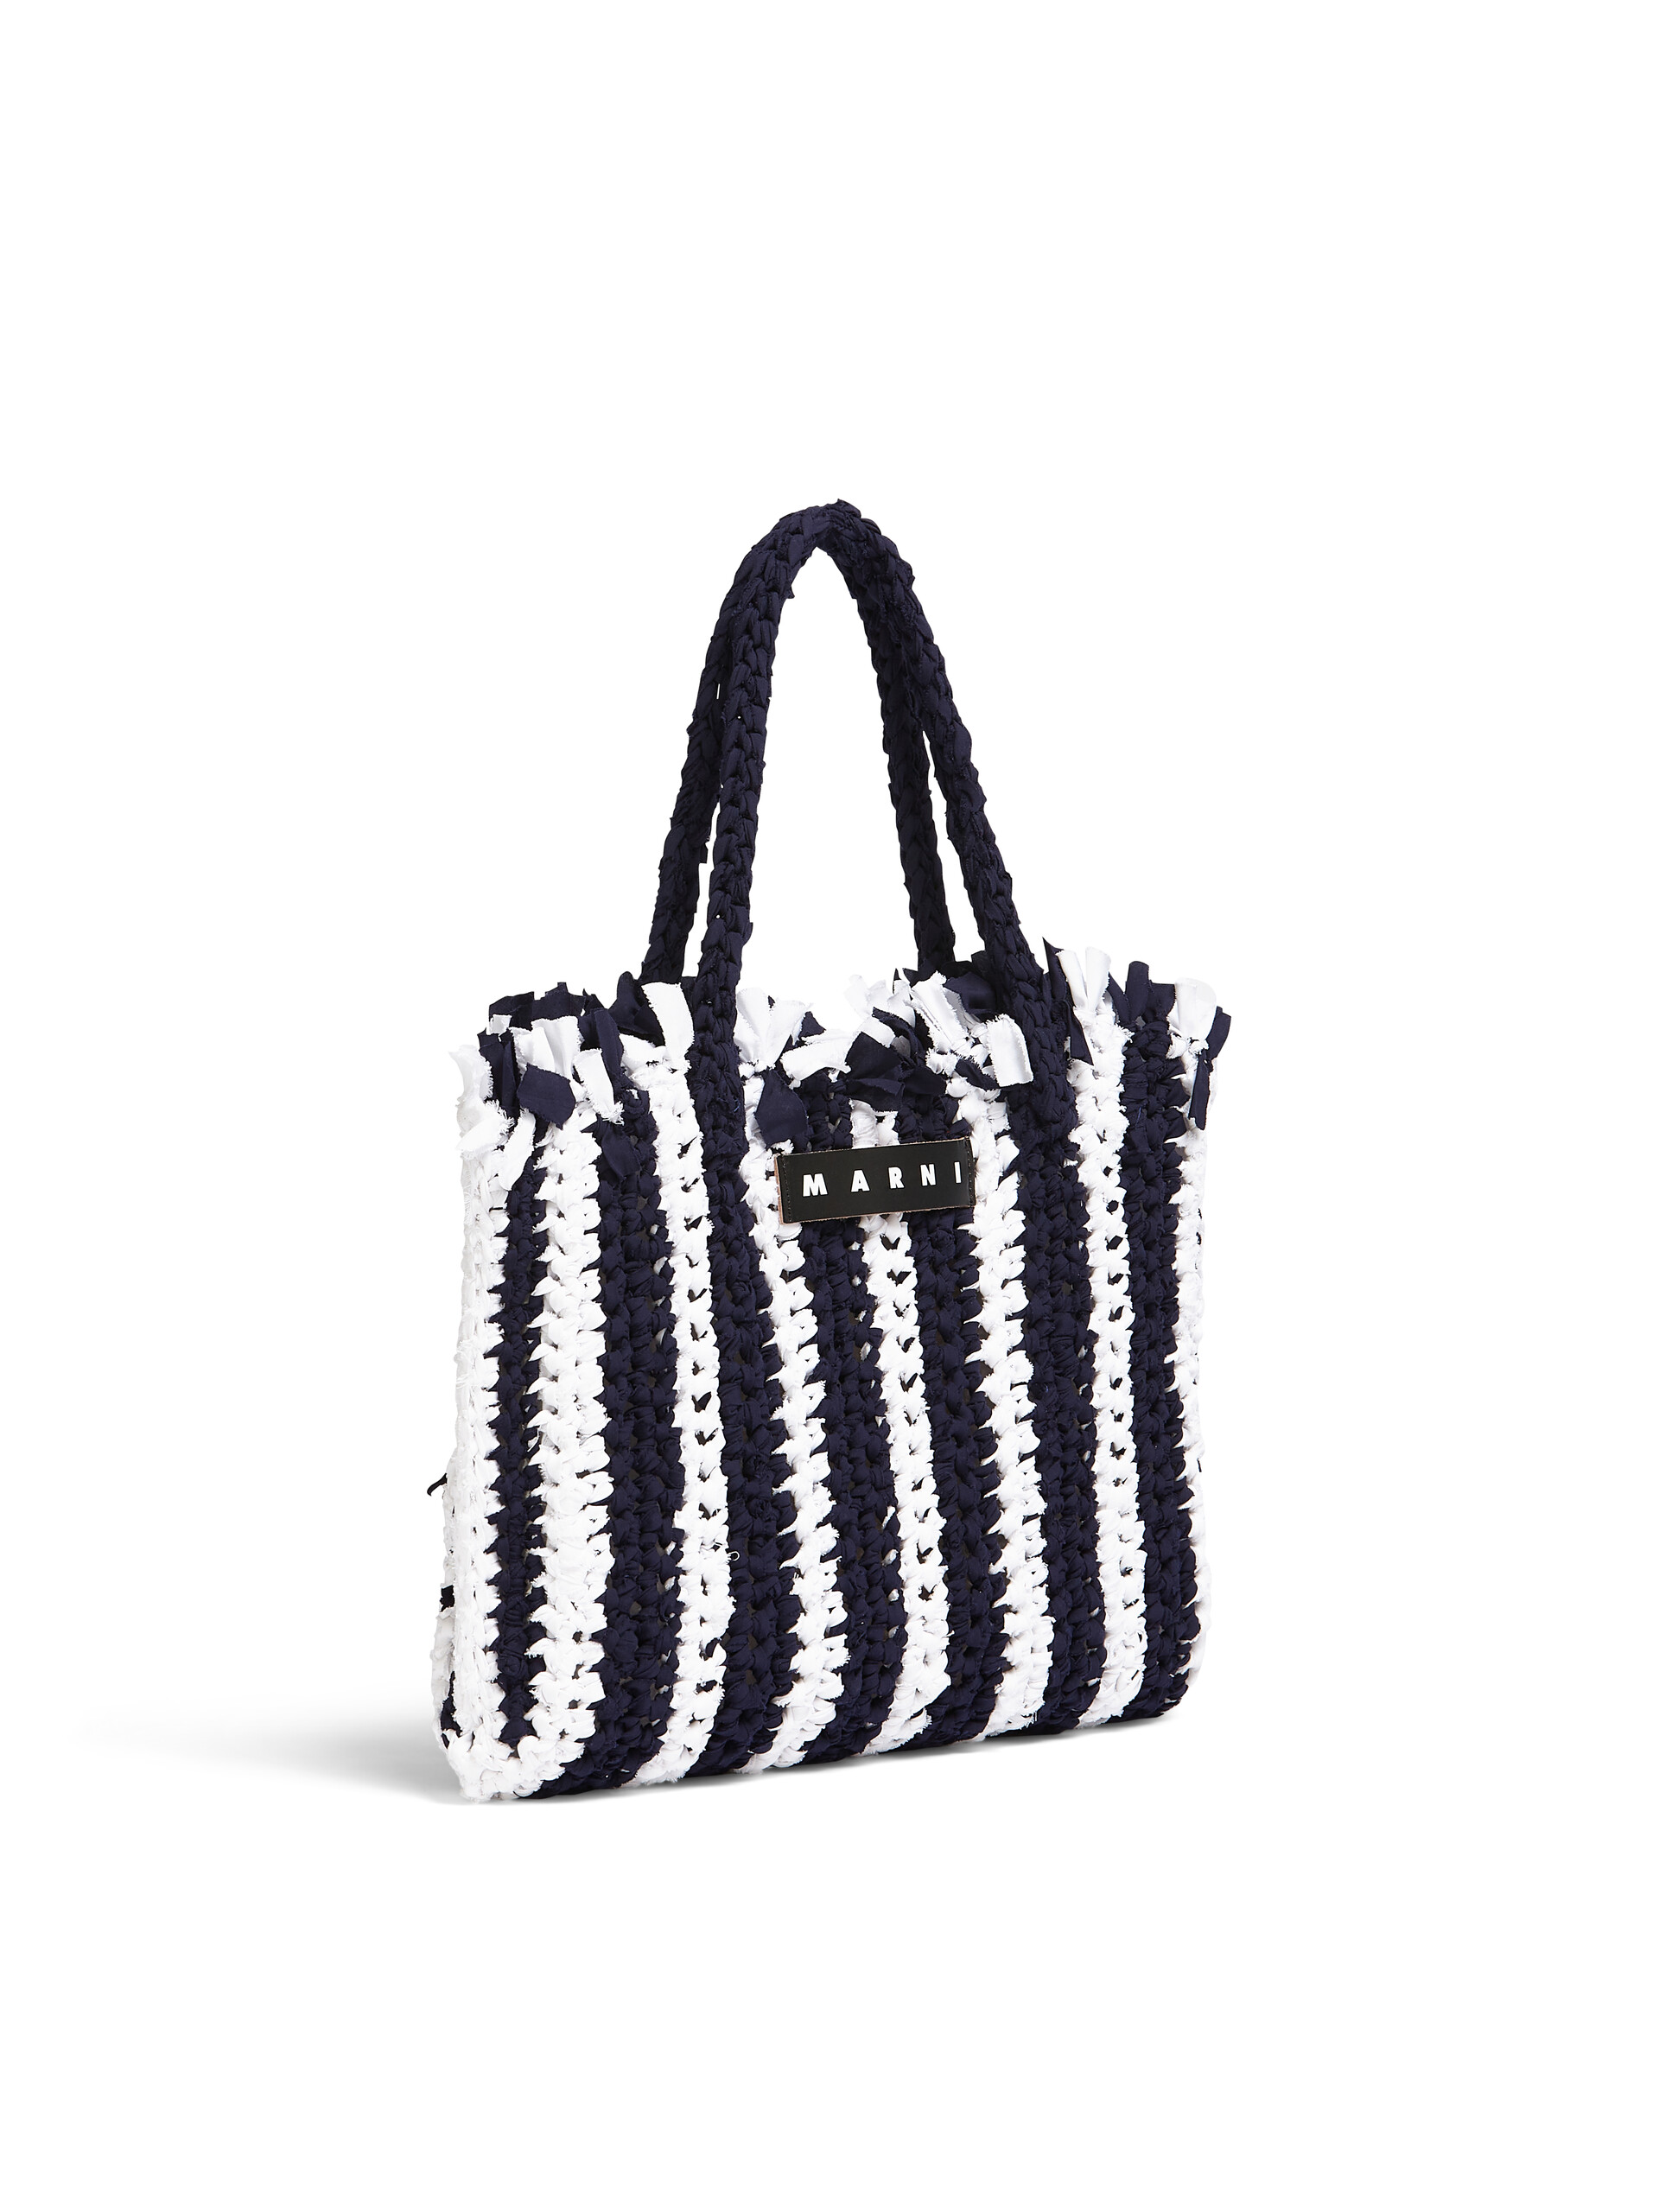 MARNI MARKET bag in white and blue cotton - Bags - Image 2